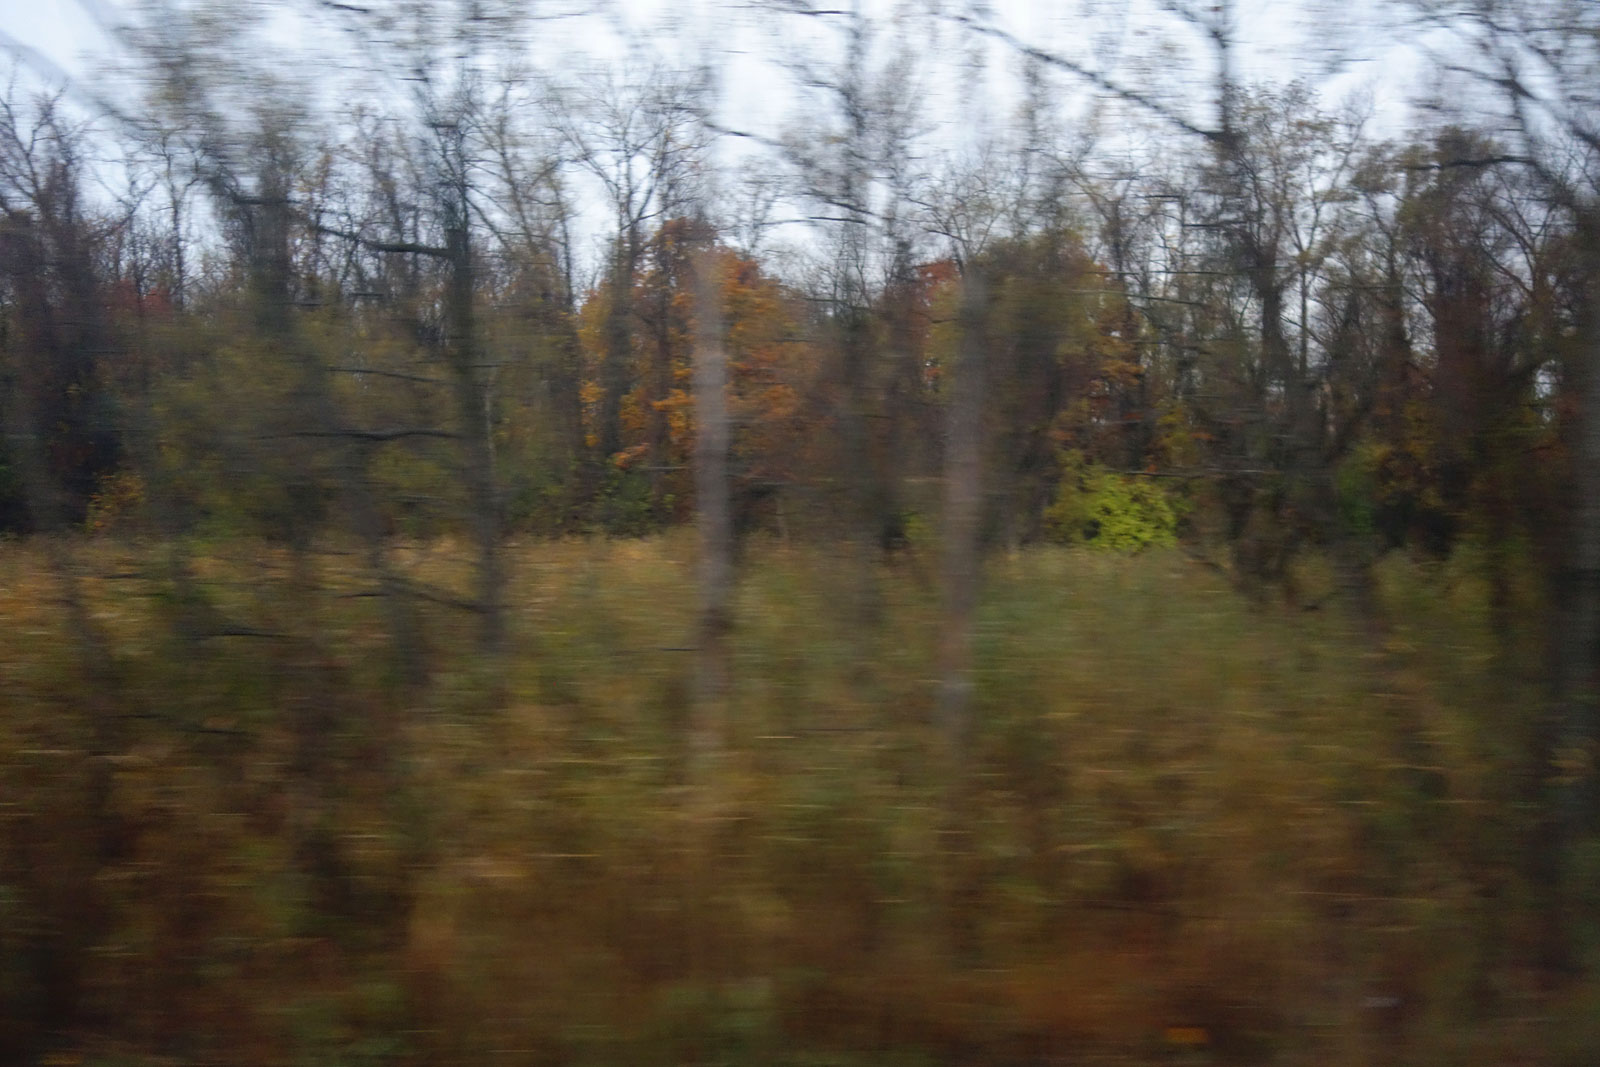 Blurry Autumn trees from train